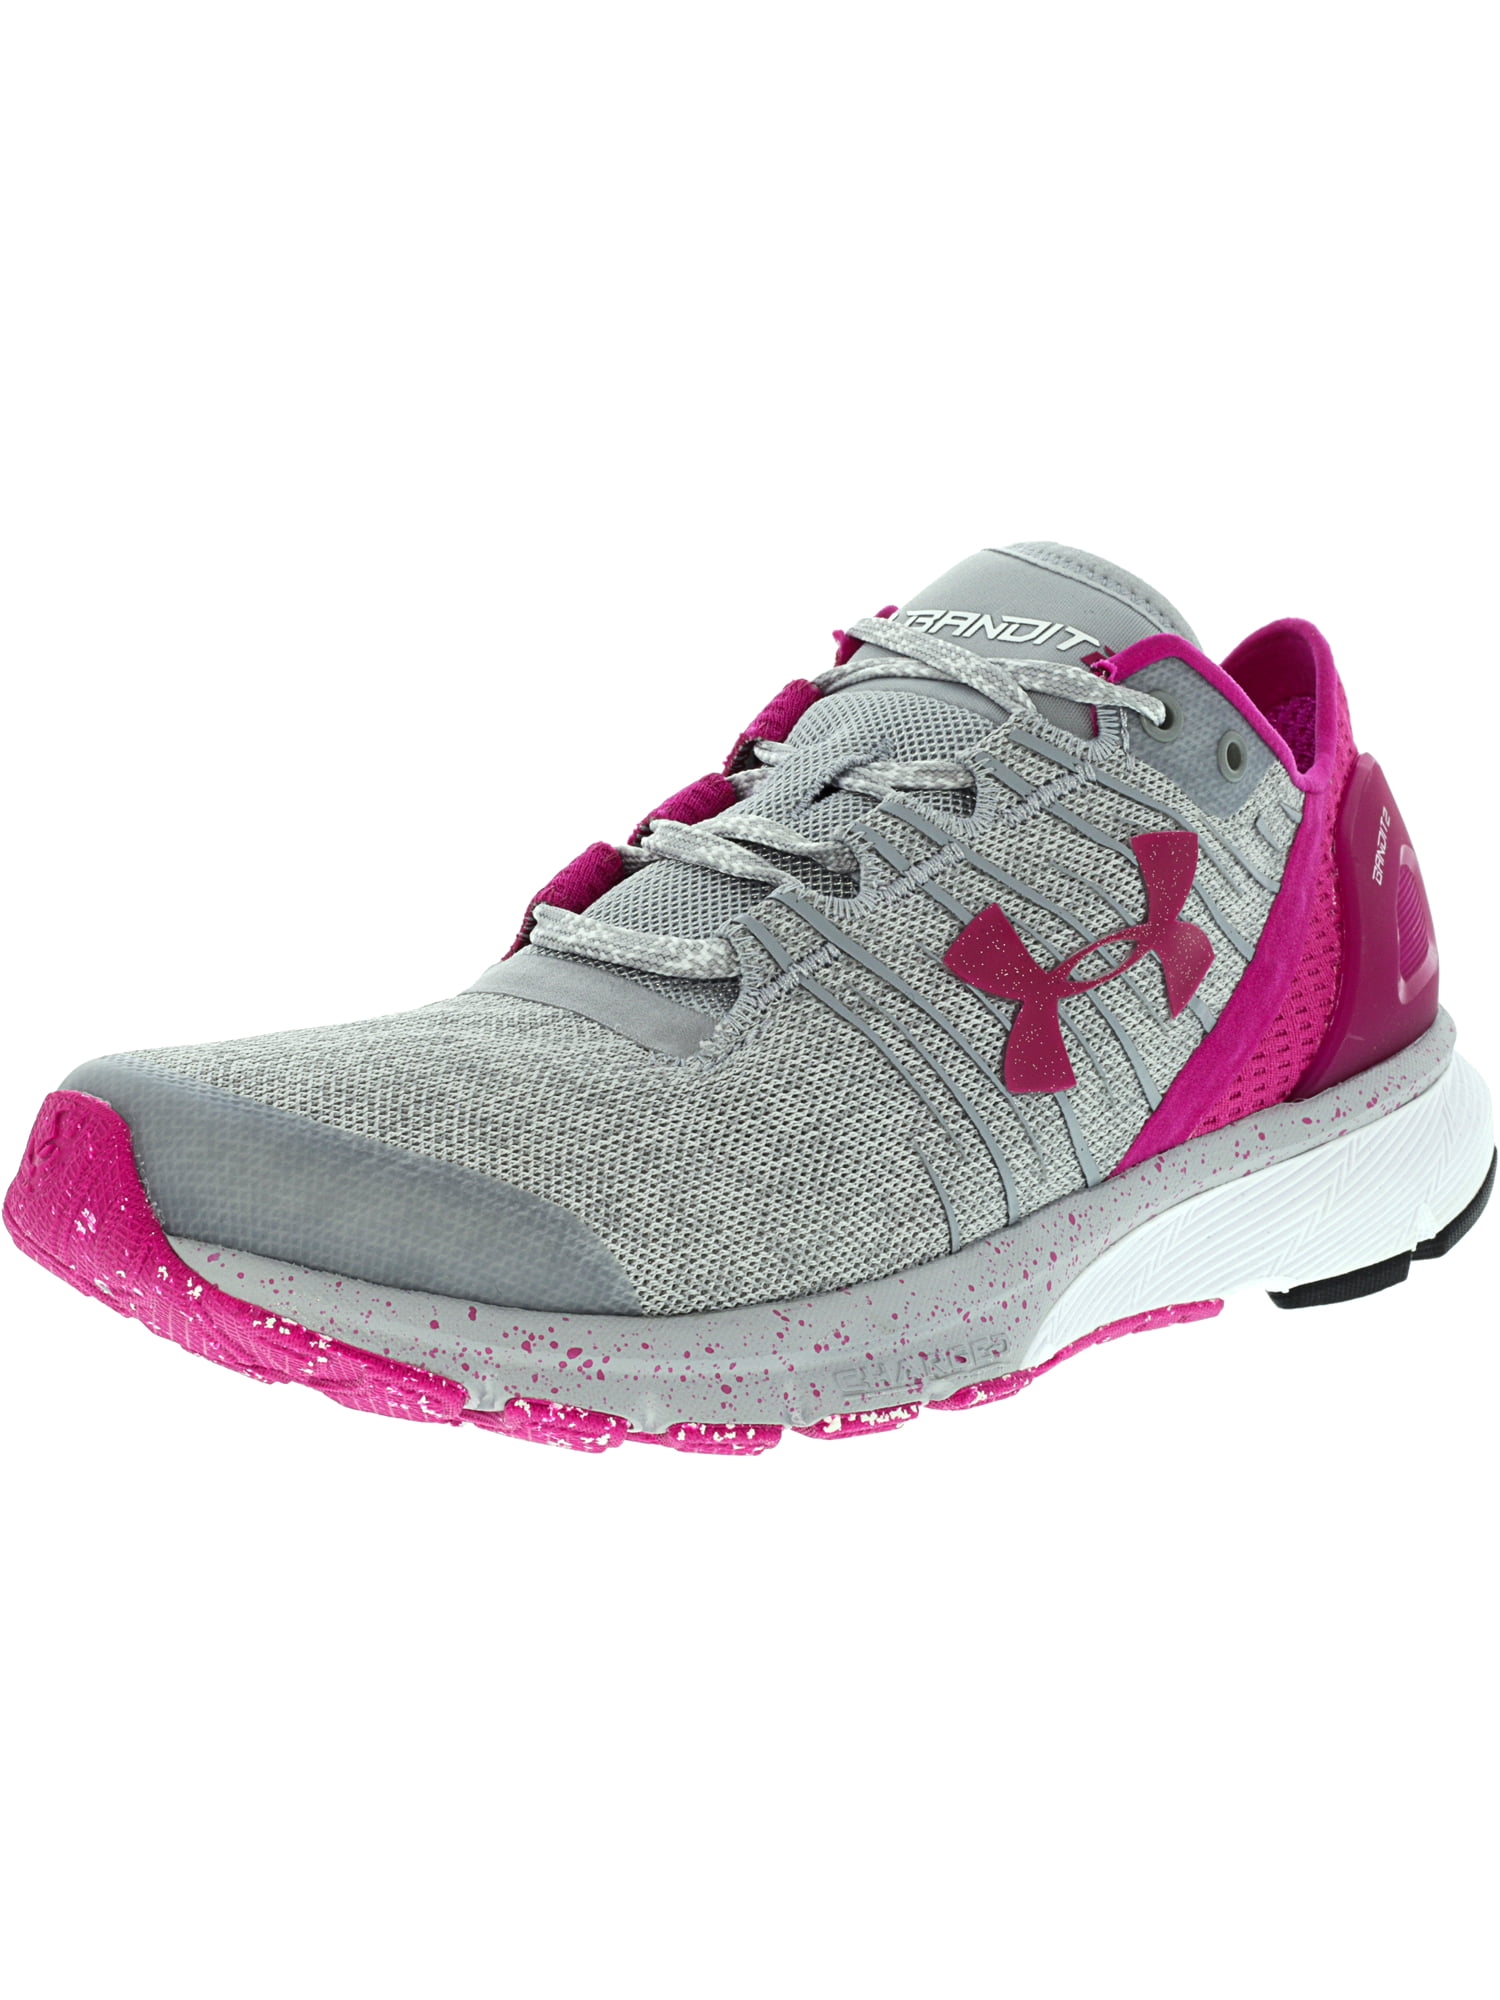 Under Armour Women's Charged Bandit 2 Overcast Gray / White Pink Ankle-High Shoe 6M Walmart.com